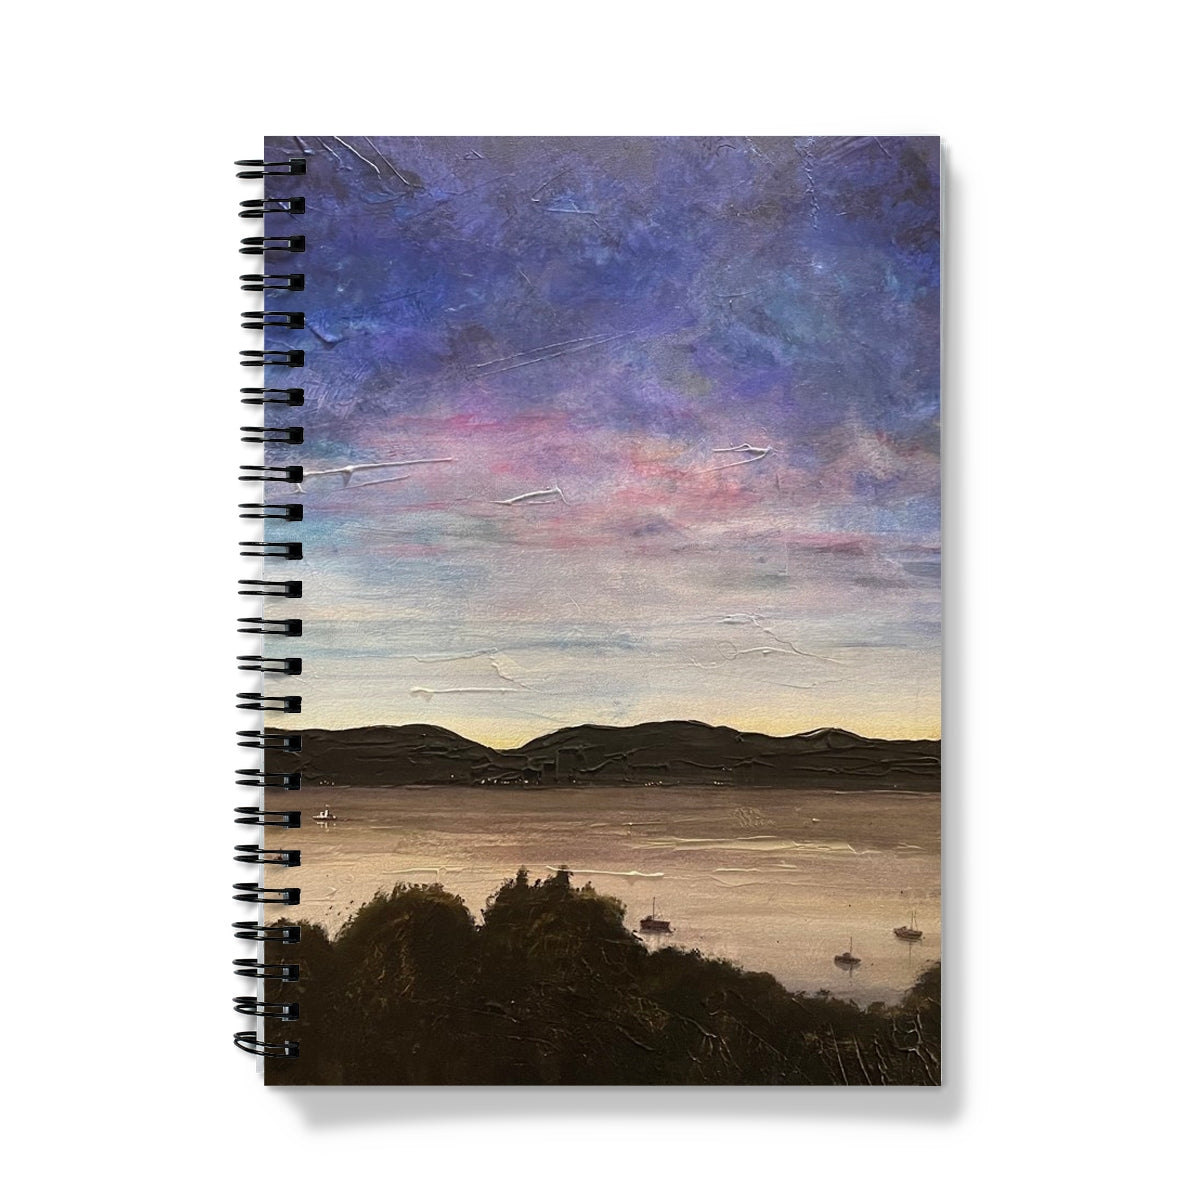 River Clyde Twilight Art Gifts Notebook-Journals & Notebooks-River Clyde Art Gallery-A5-Graph-Paintings, Prints, Homeware, Art Gifts From Scotland By Scottish Artist Kevin Hunter